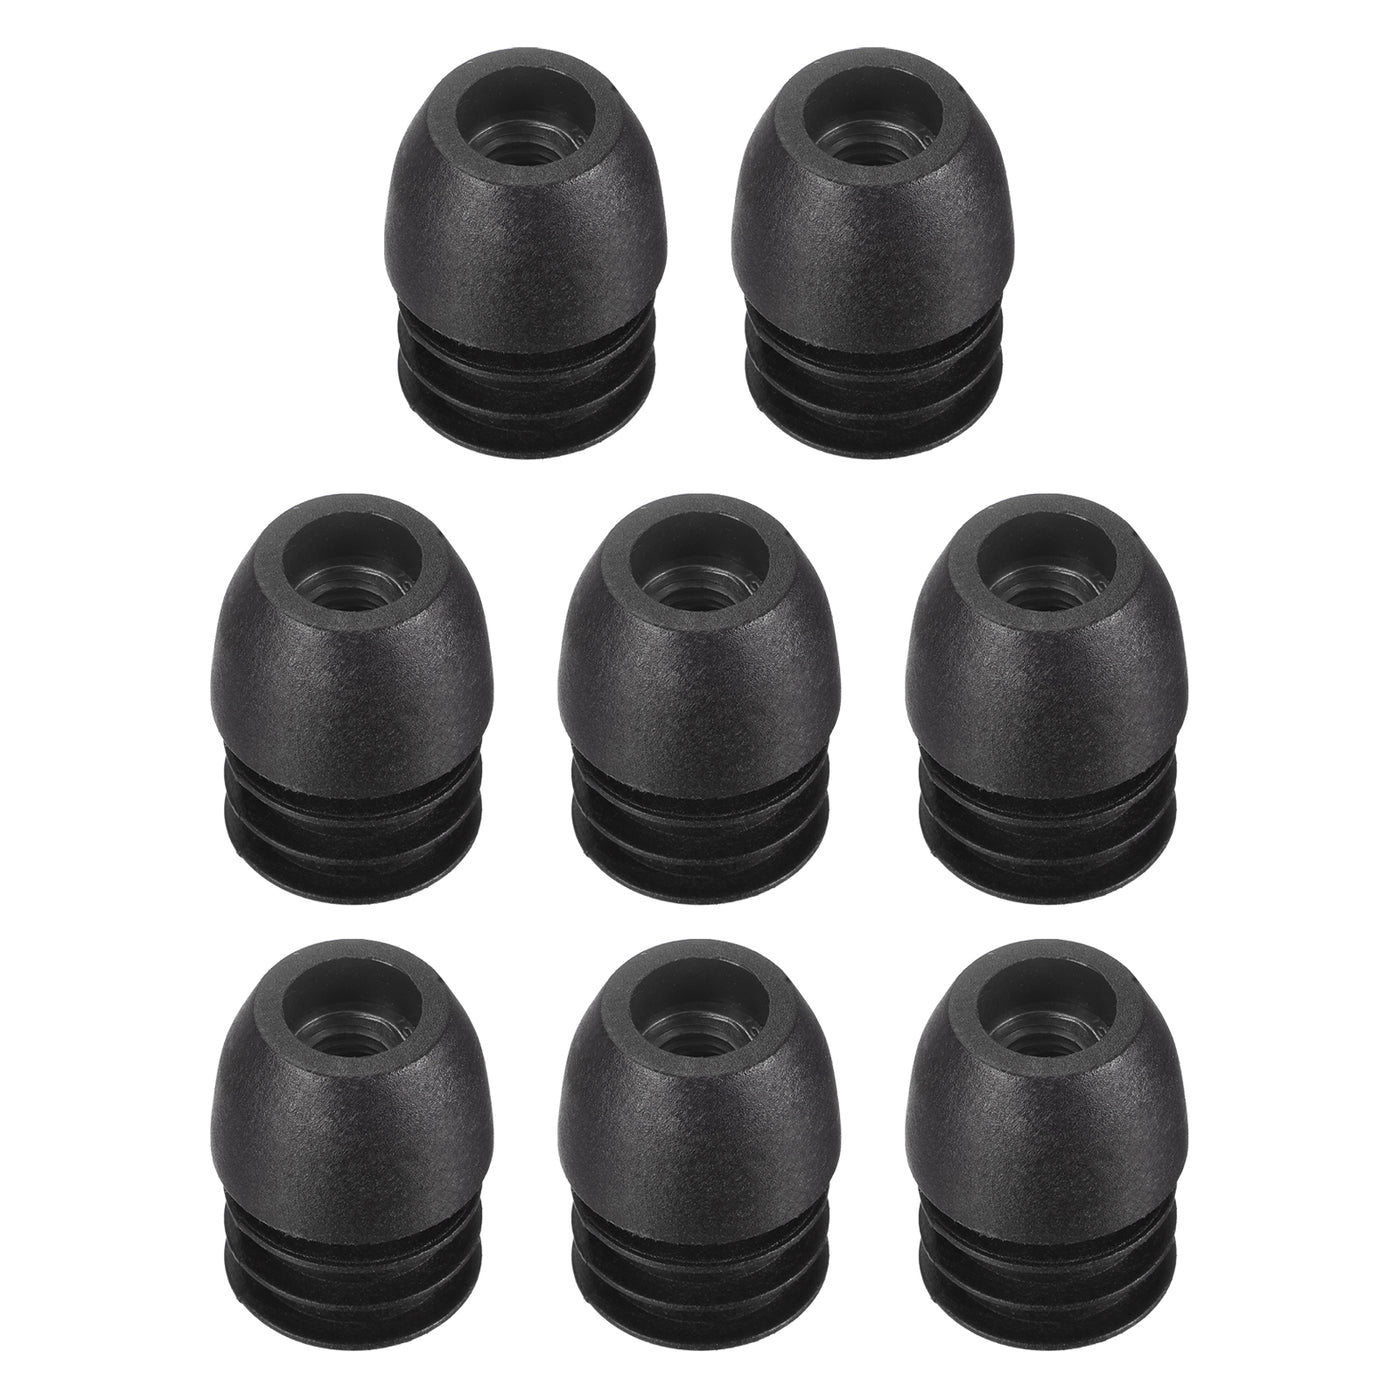 uxcell Uxcell 8Pcs 22mm/0.87" Caster Insert with Thread, M8 Thread for Furniture